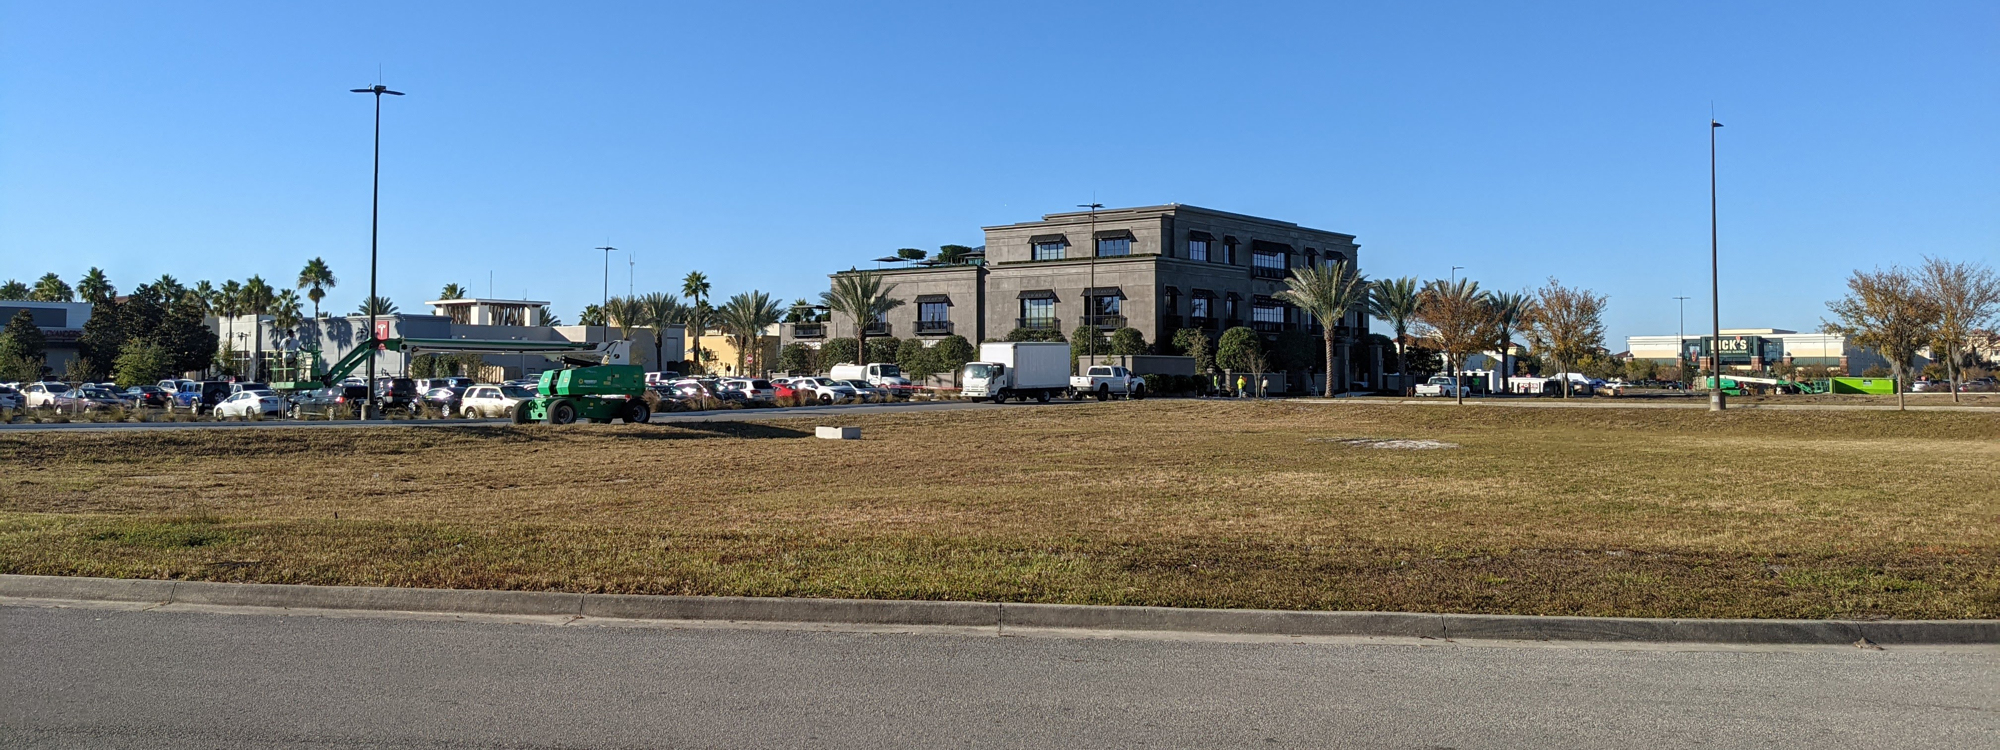 RH Jacksonville comprises 70,000 square feet of indoor and outdoor space on three levels. This is the view from the Southeast corner of St. Johns Town Center.